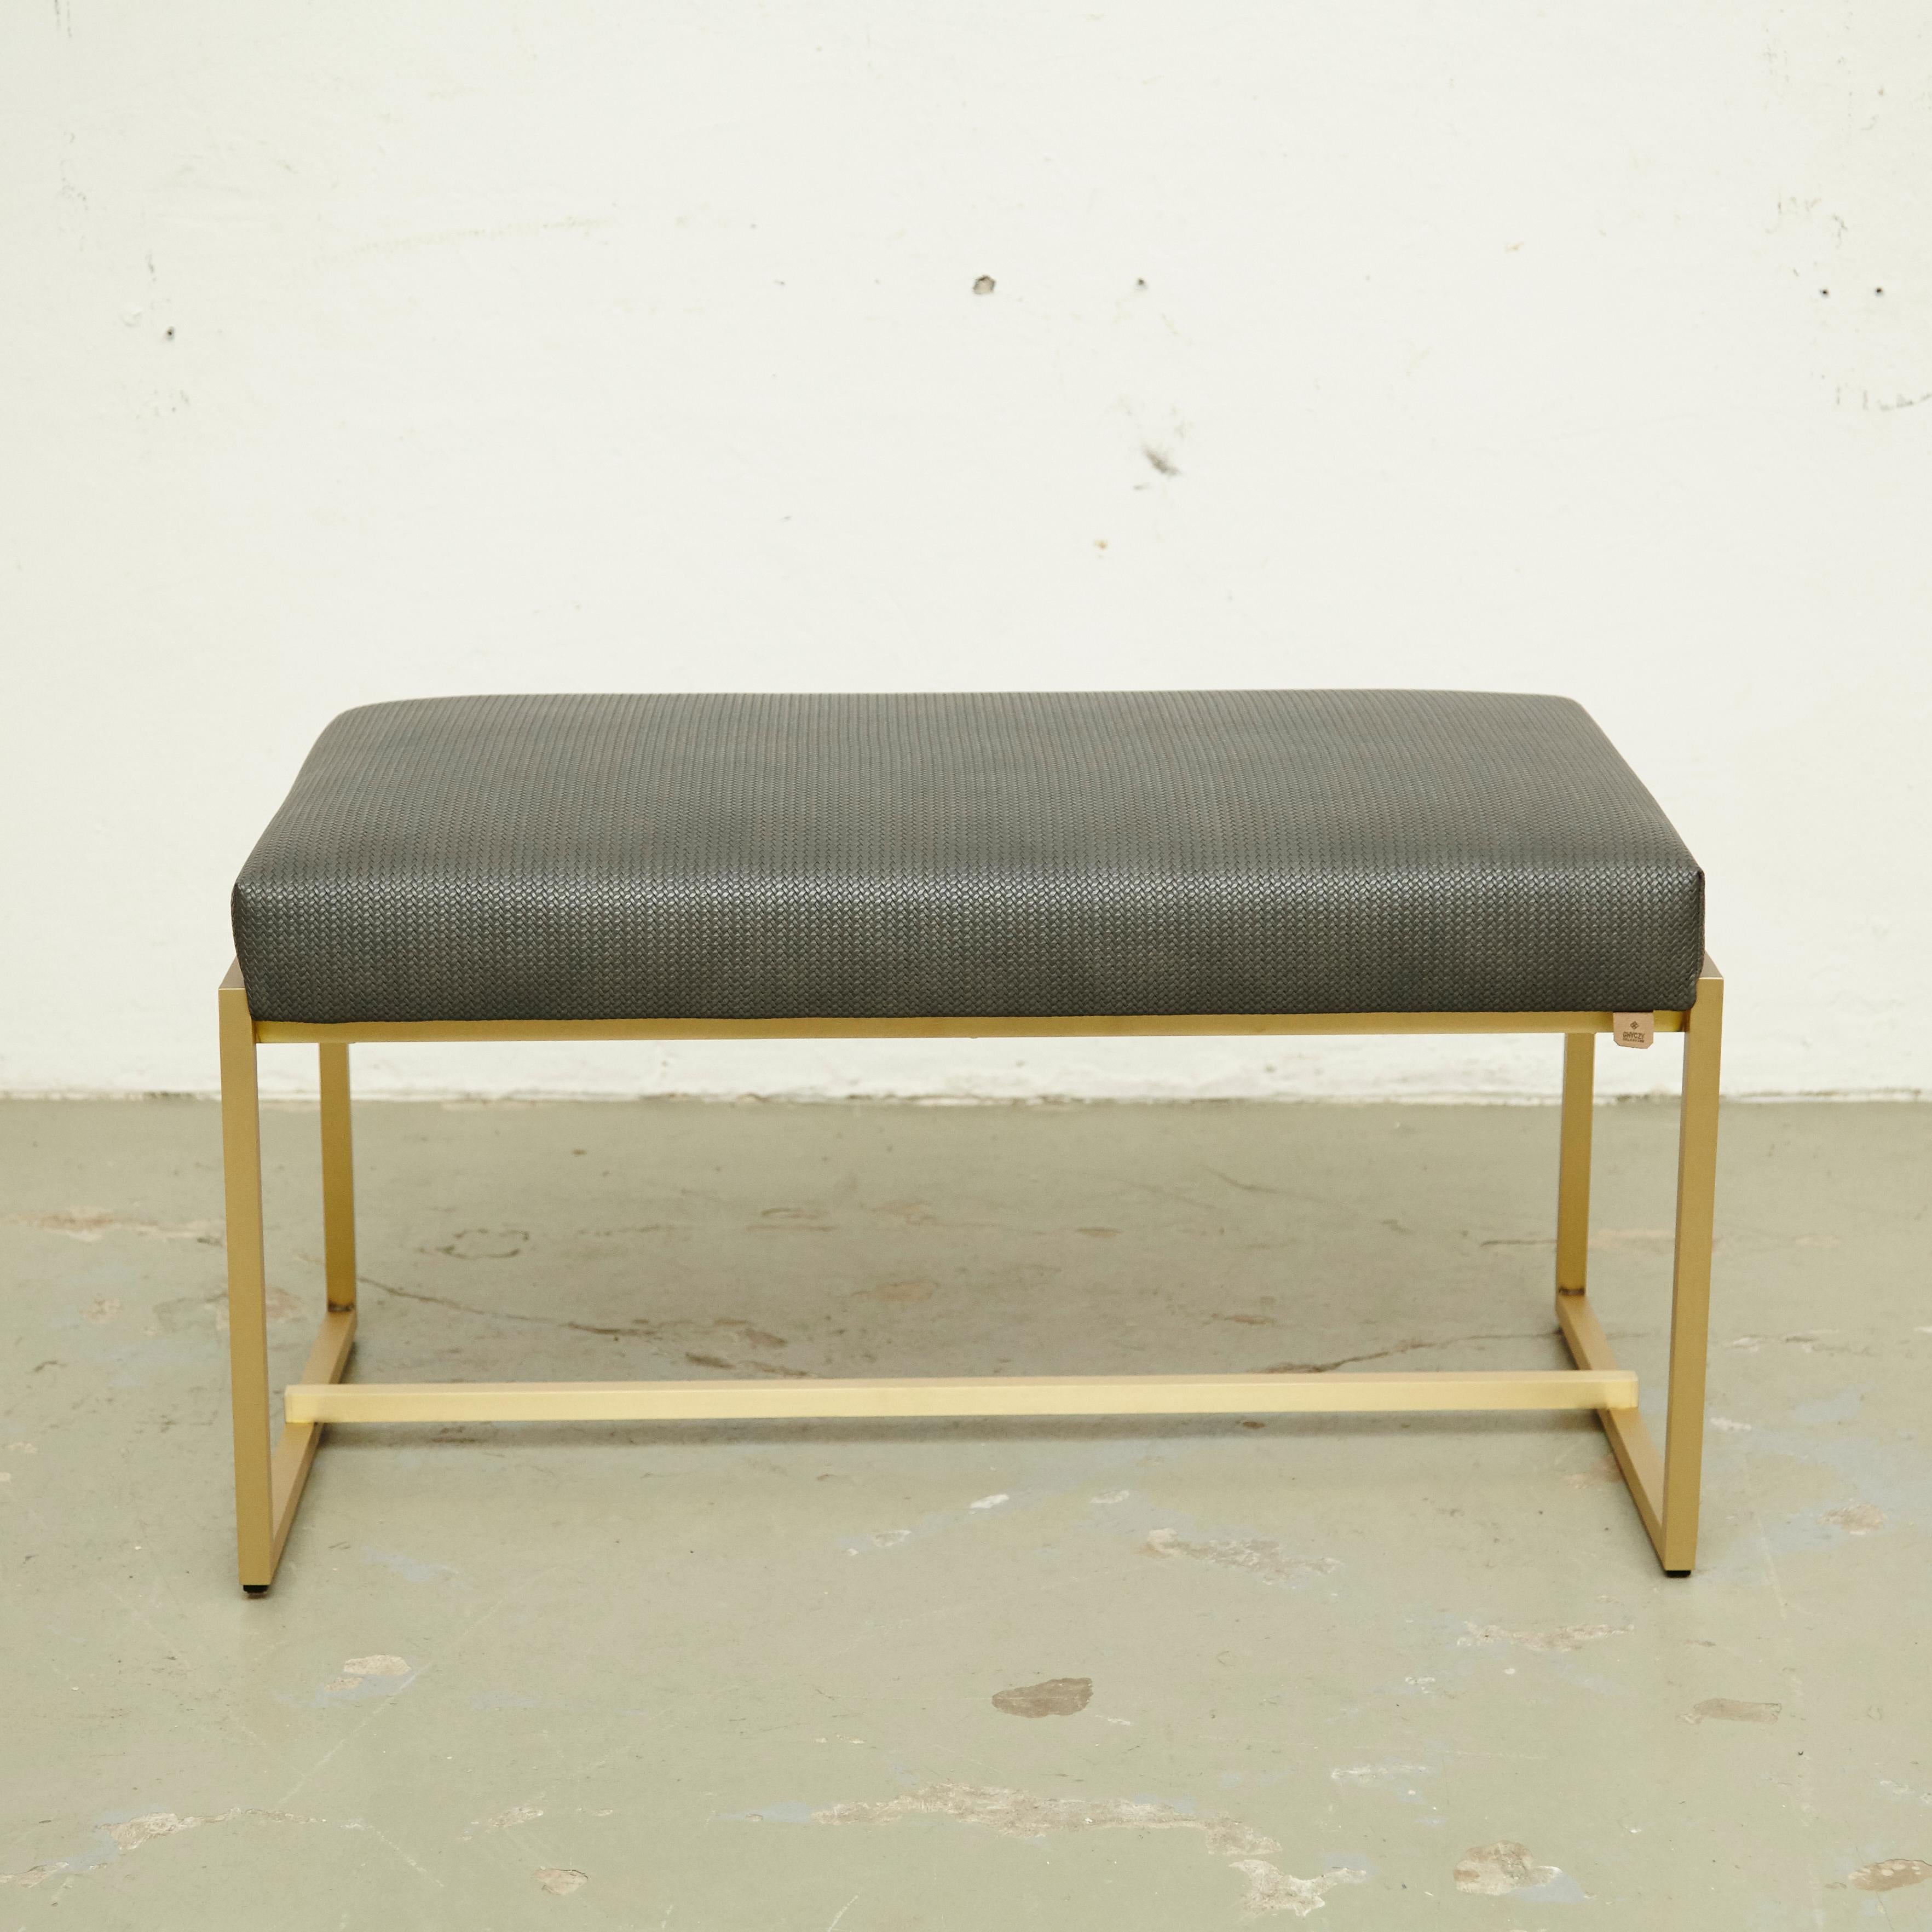 Minimalist Peter Ghyzcy Bench Urban Grace GB03 and Details Leather Look For Sale